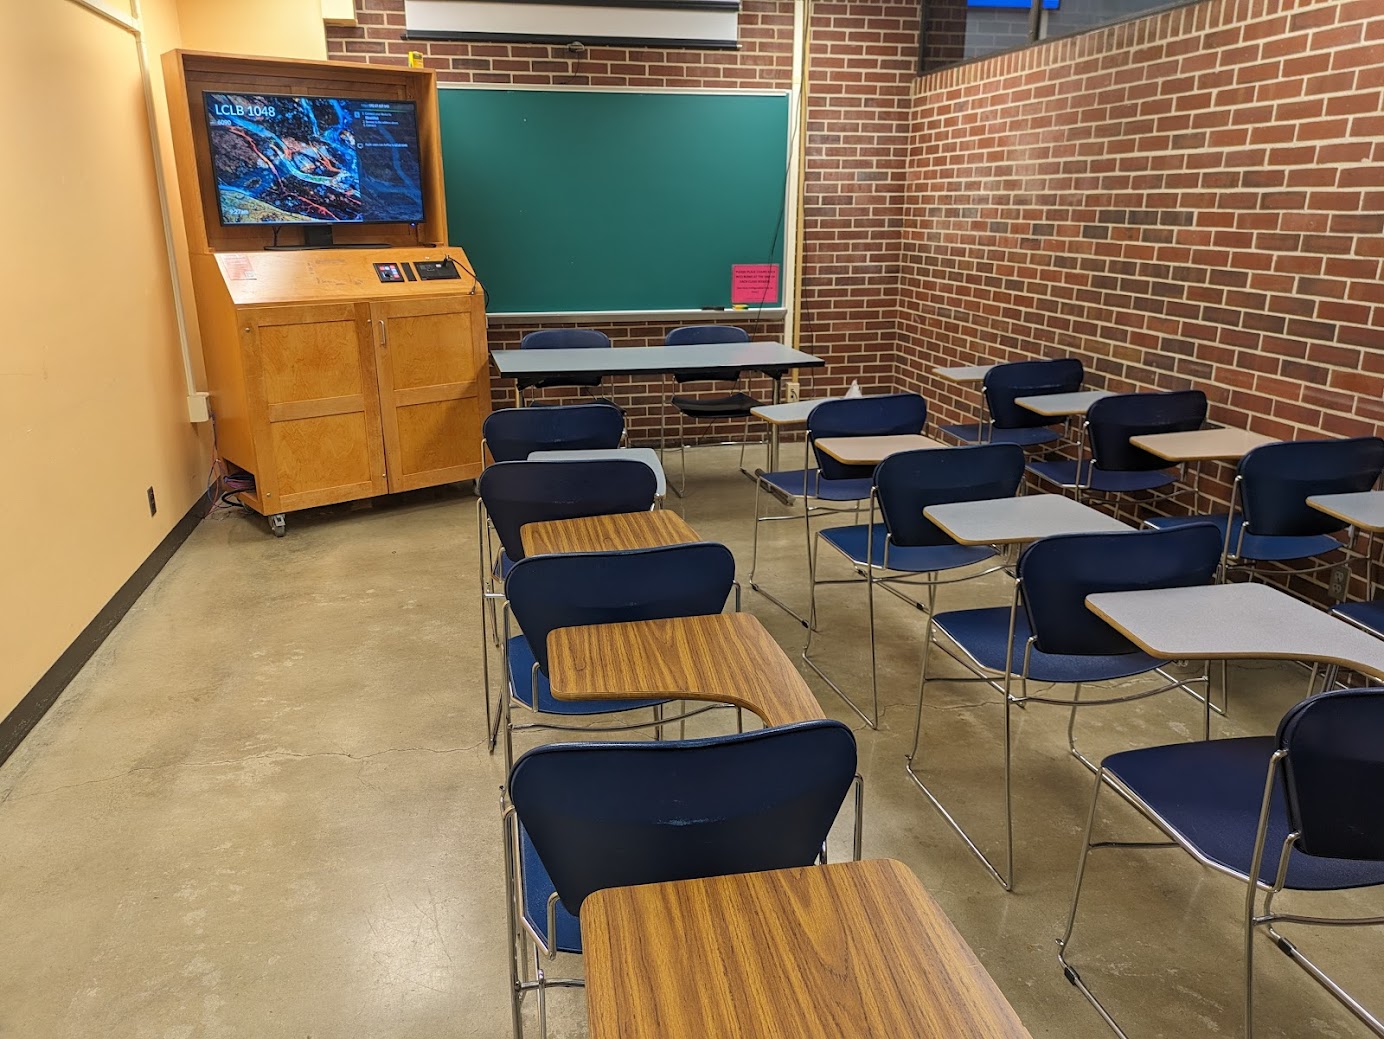 A view of the classroom with moveable tableted arm chairs, chalkboard, and an instructor table in front.